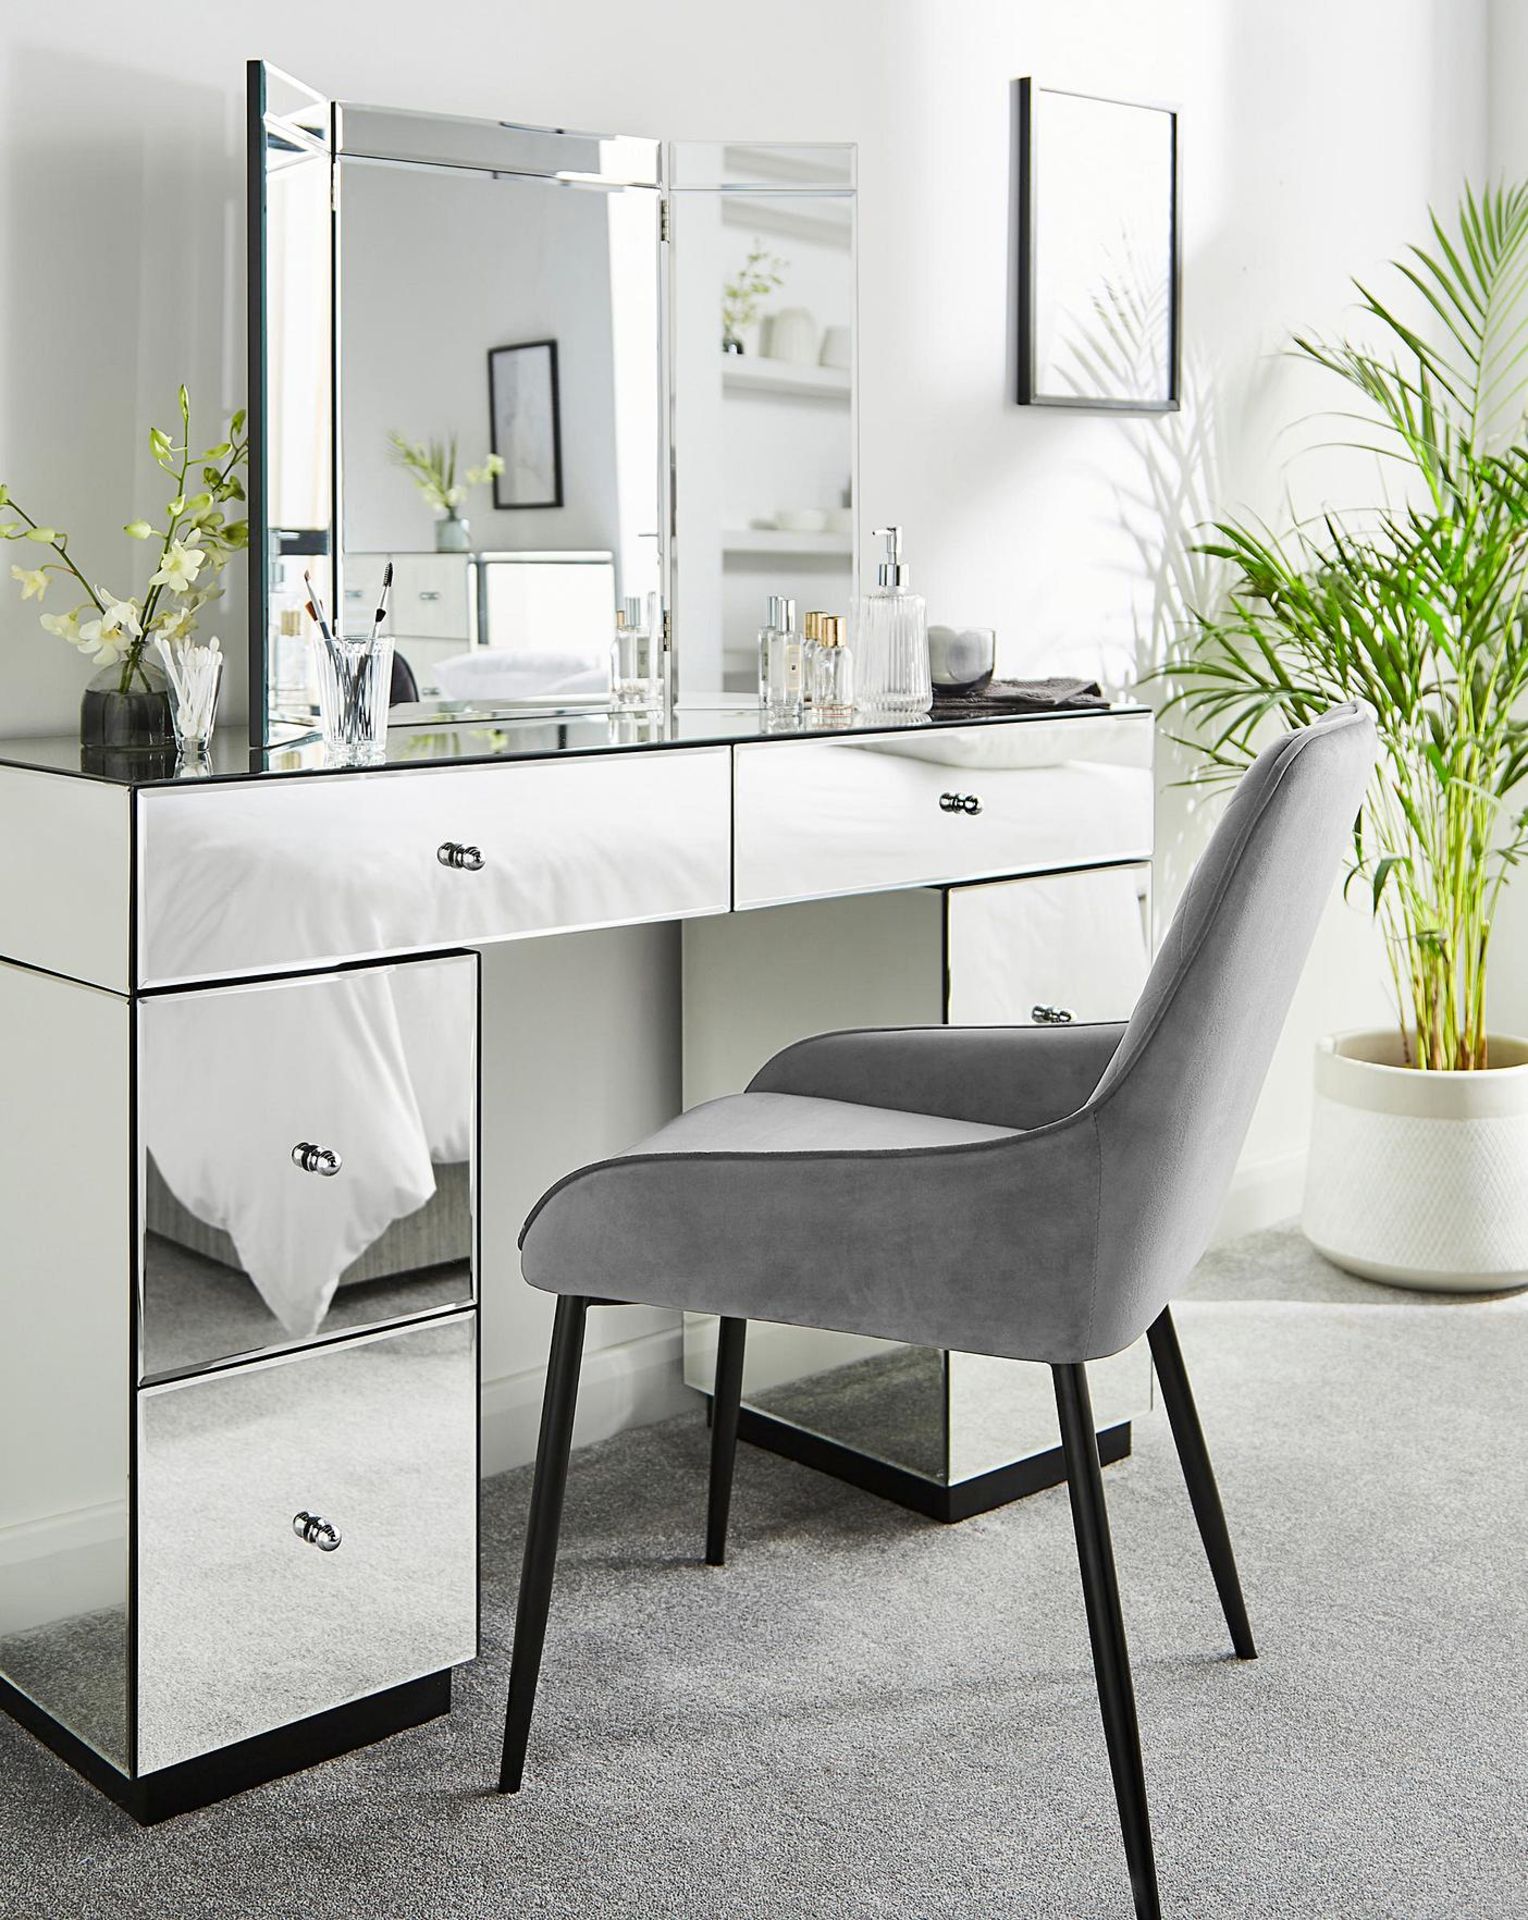 NEW & BOXED Deco Assembled Mirrored Dressing Table. RRP £599. The Mirage Mirrored Dressing Table